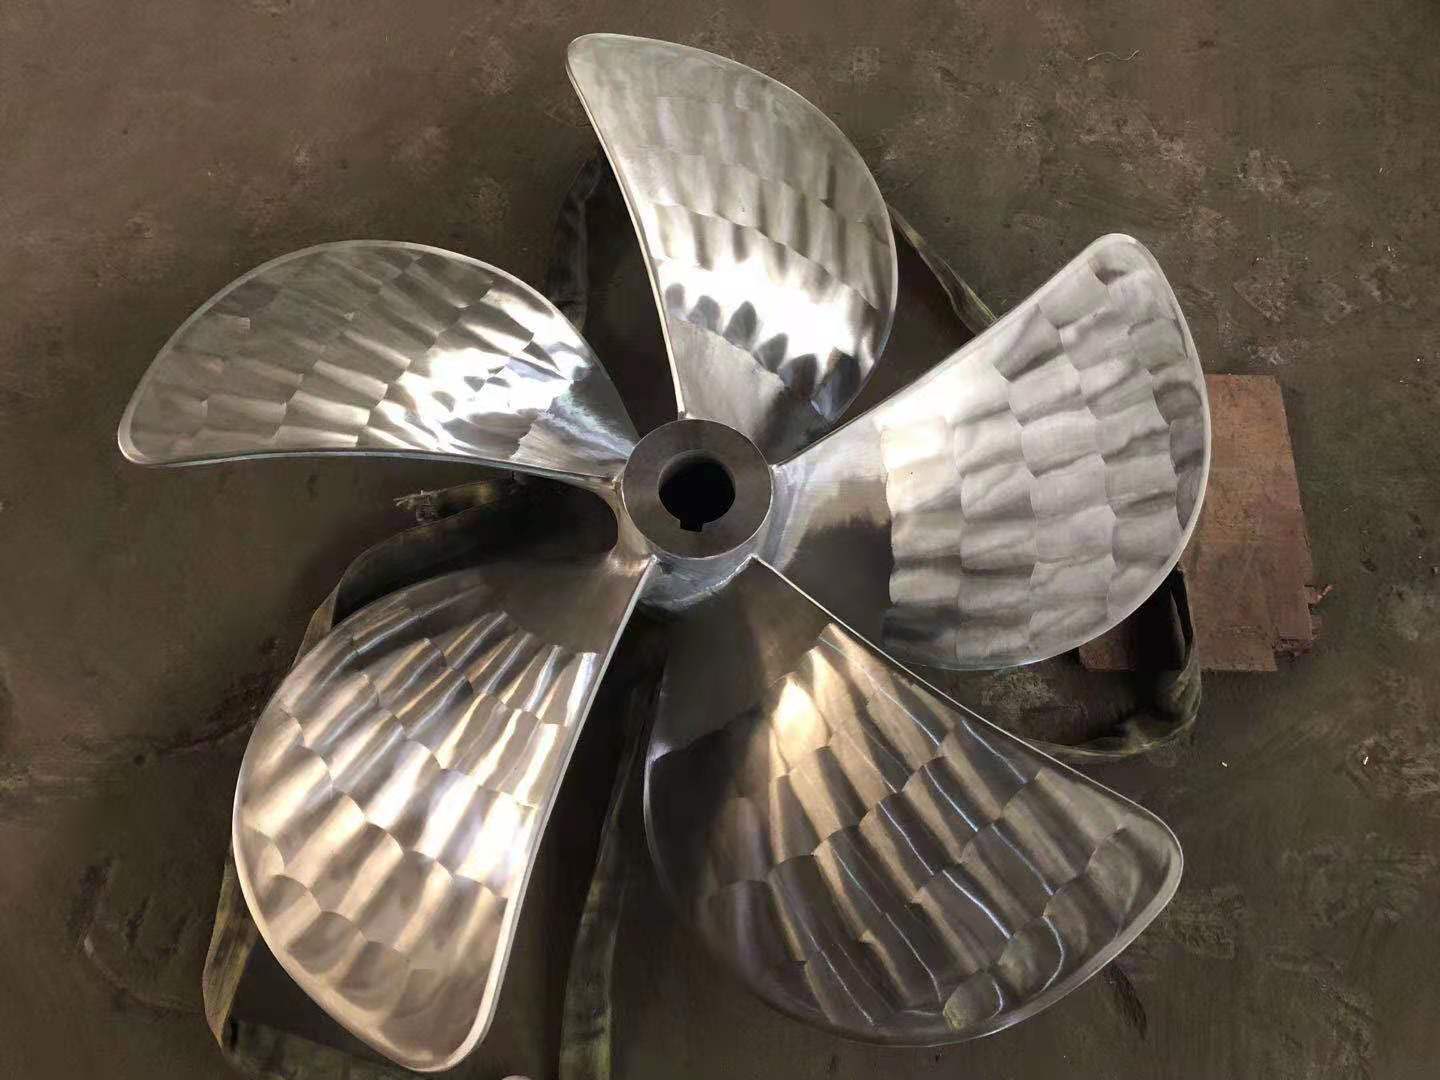 Solas boat 5 blades stainless steel fix pitch propeller marine vessel ship propeller